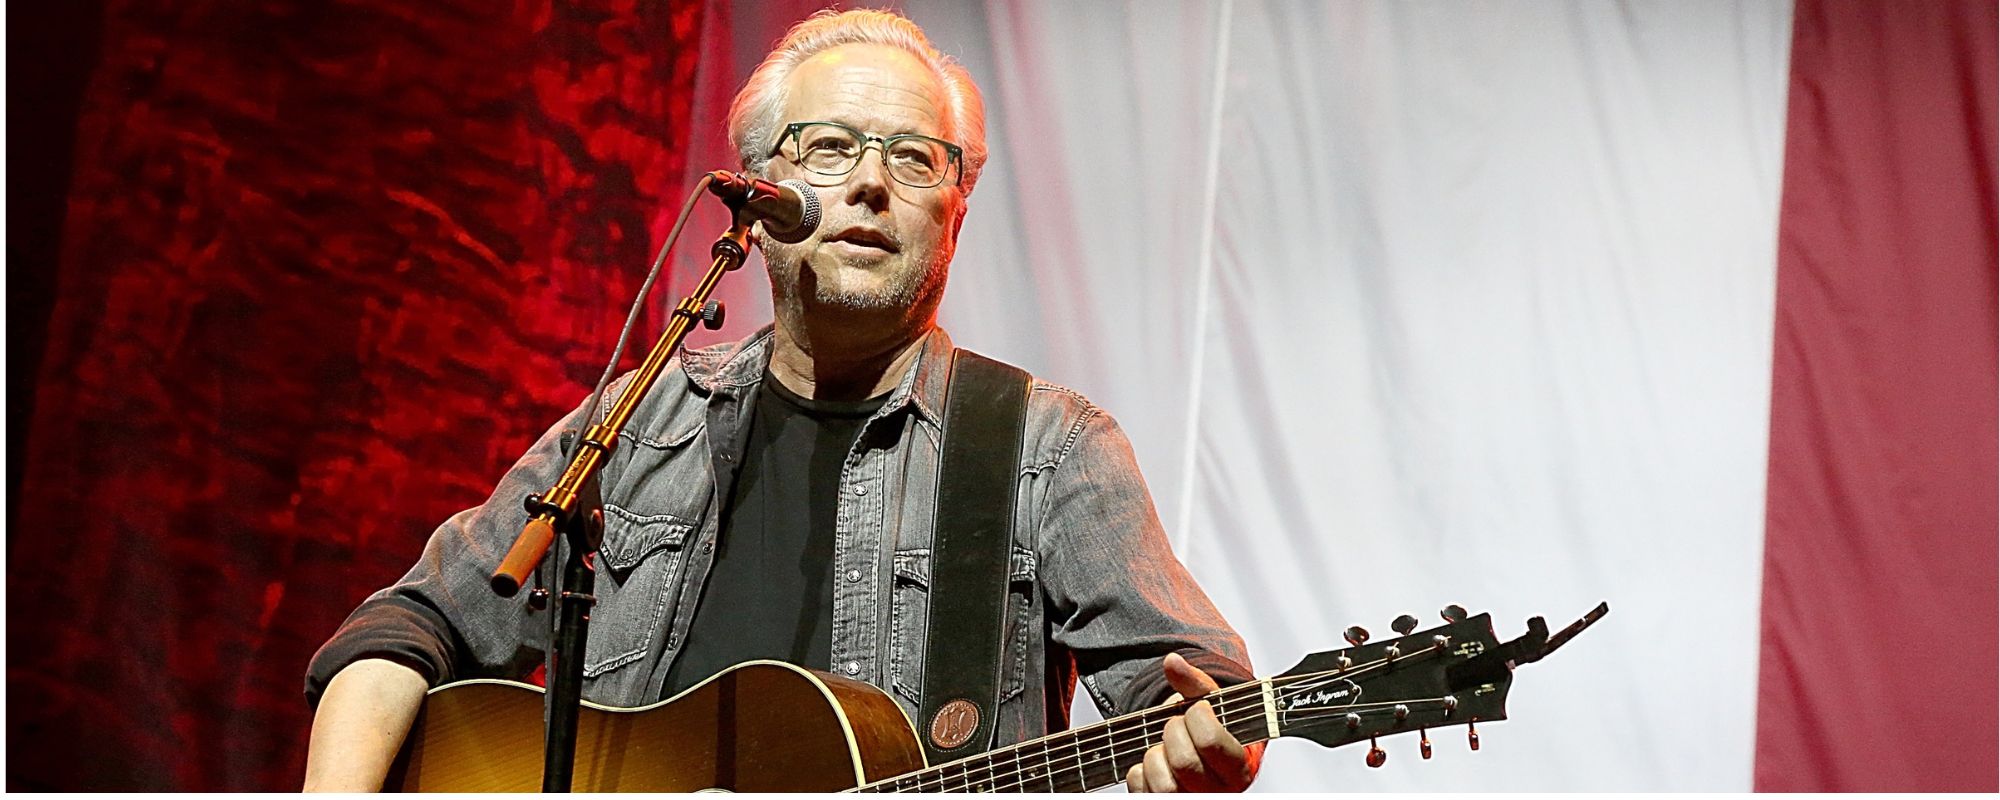 5 Songs You Didn’t Know Were Written by Radney Foster